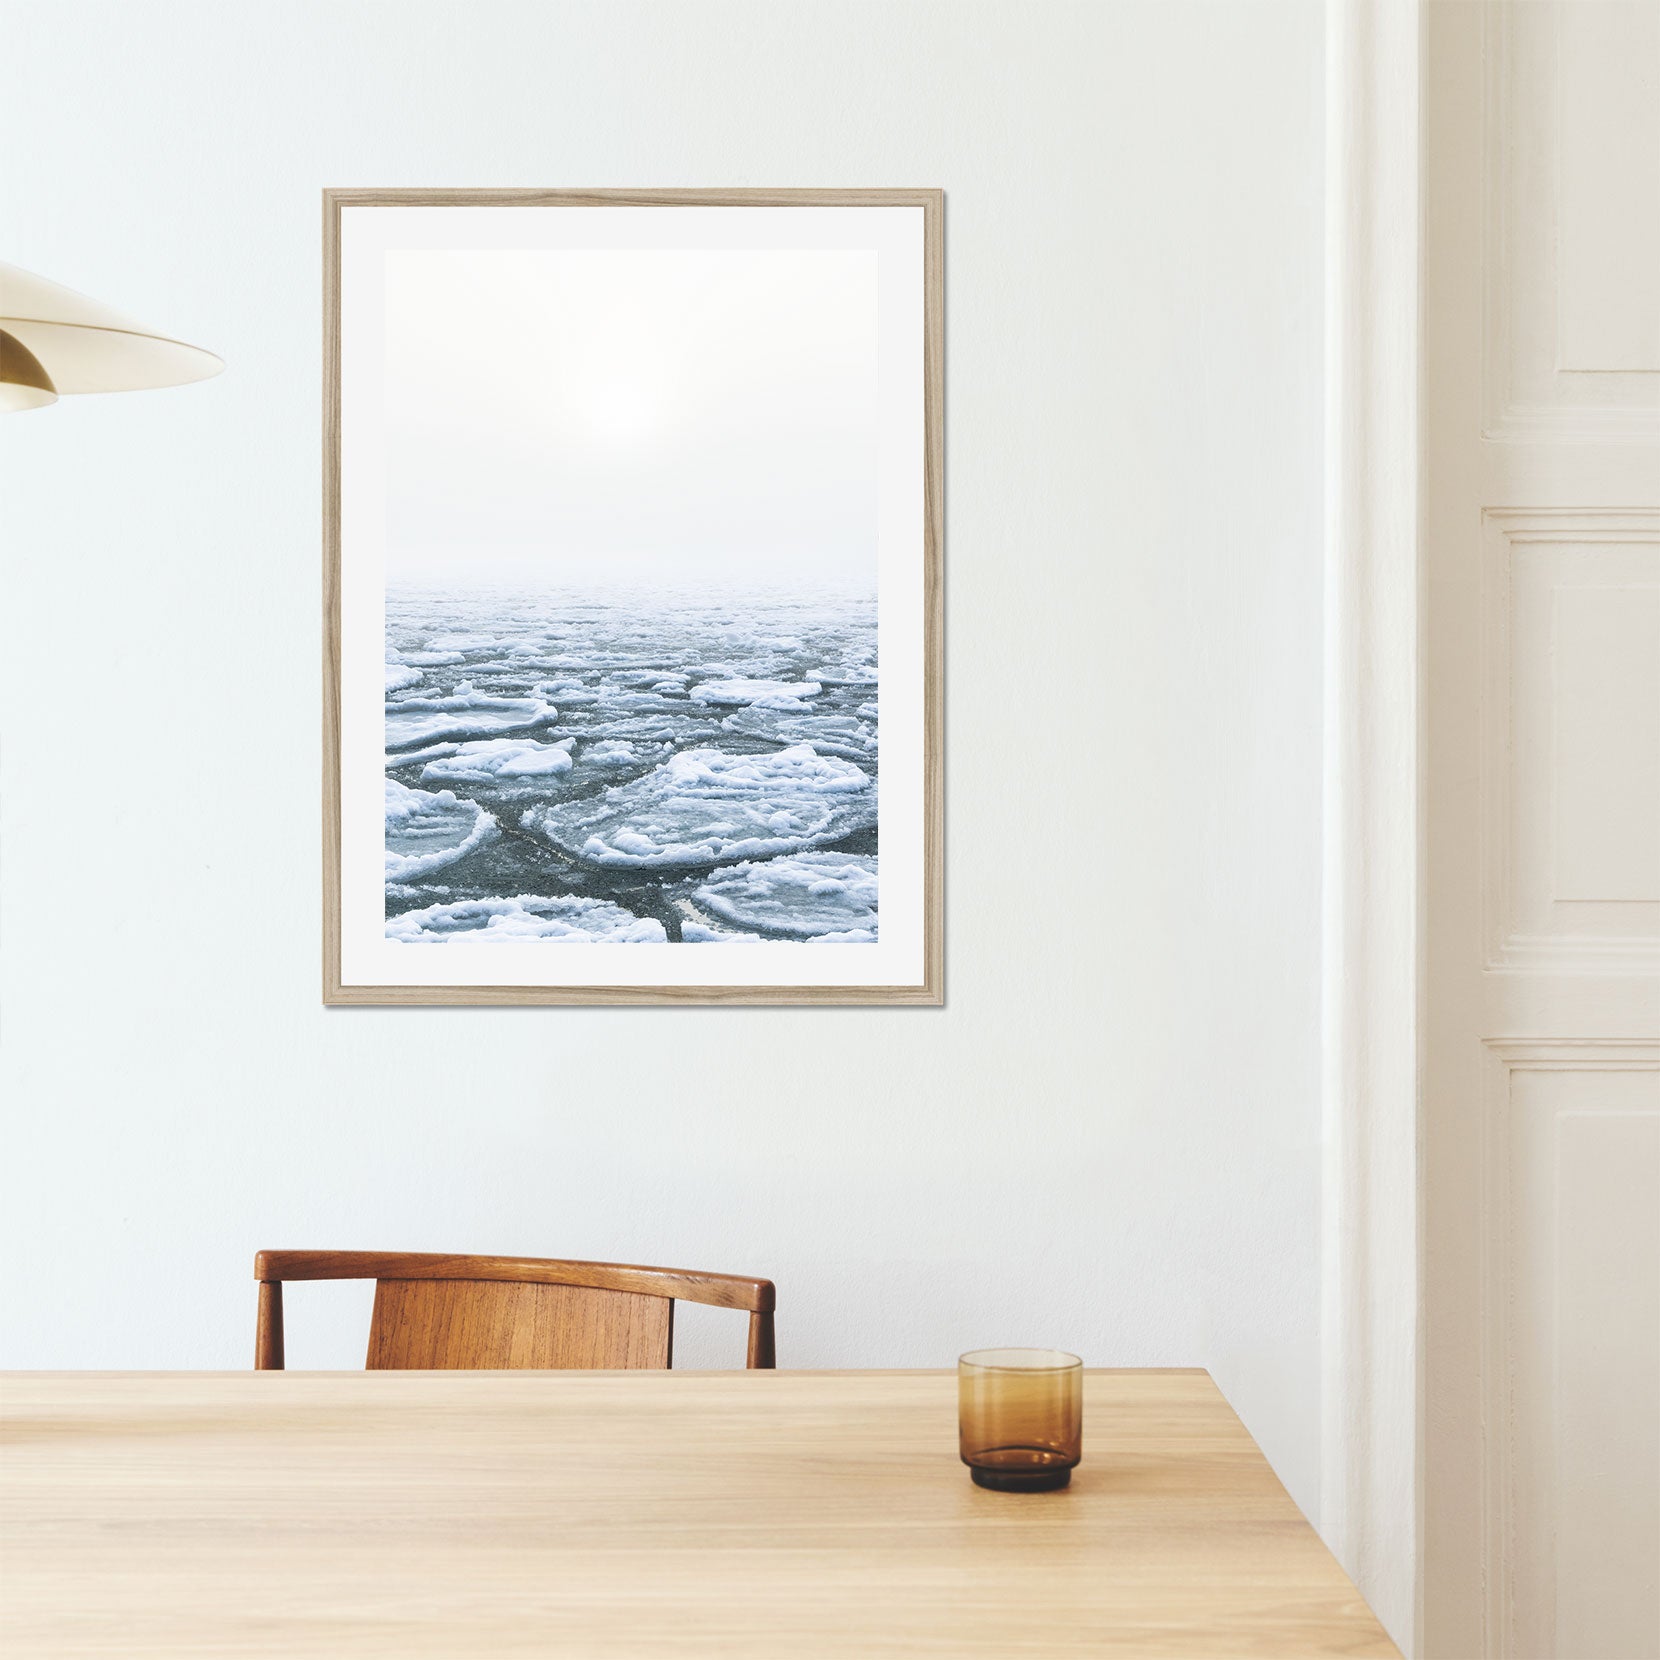 A framed print of ice pans on foggy winter day